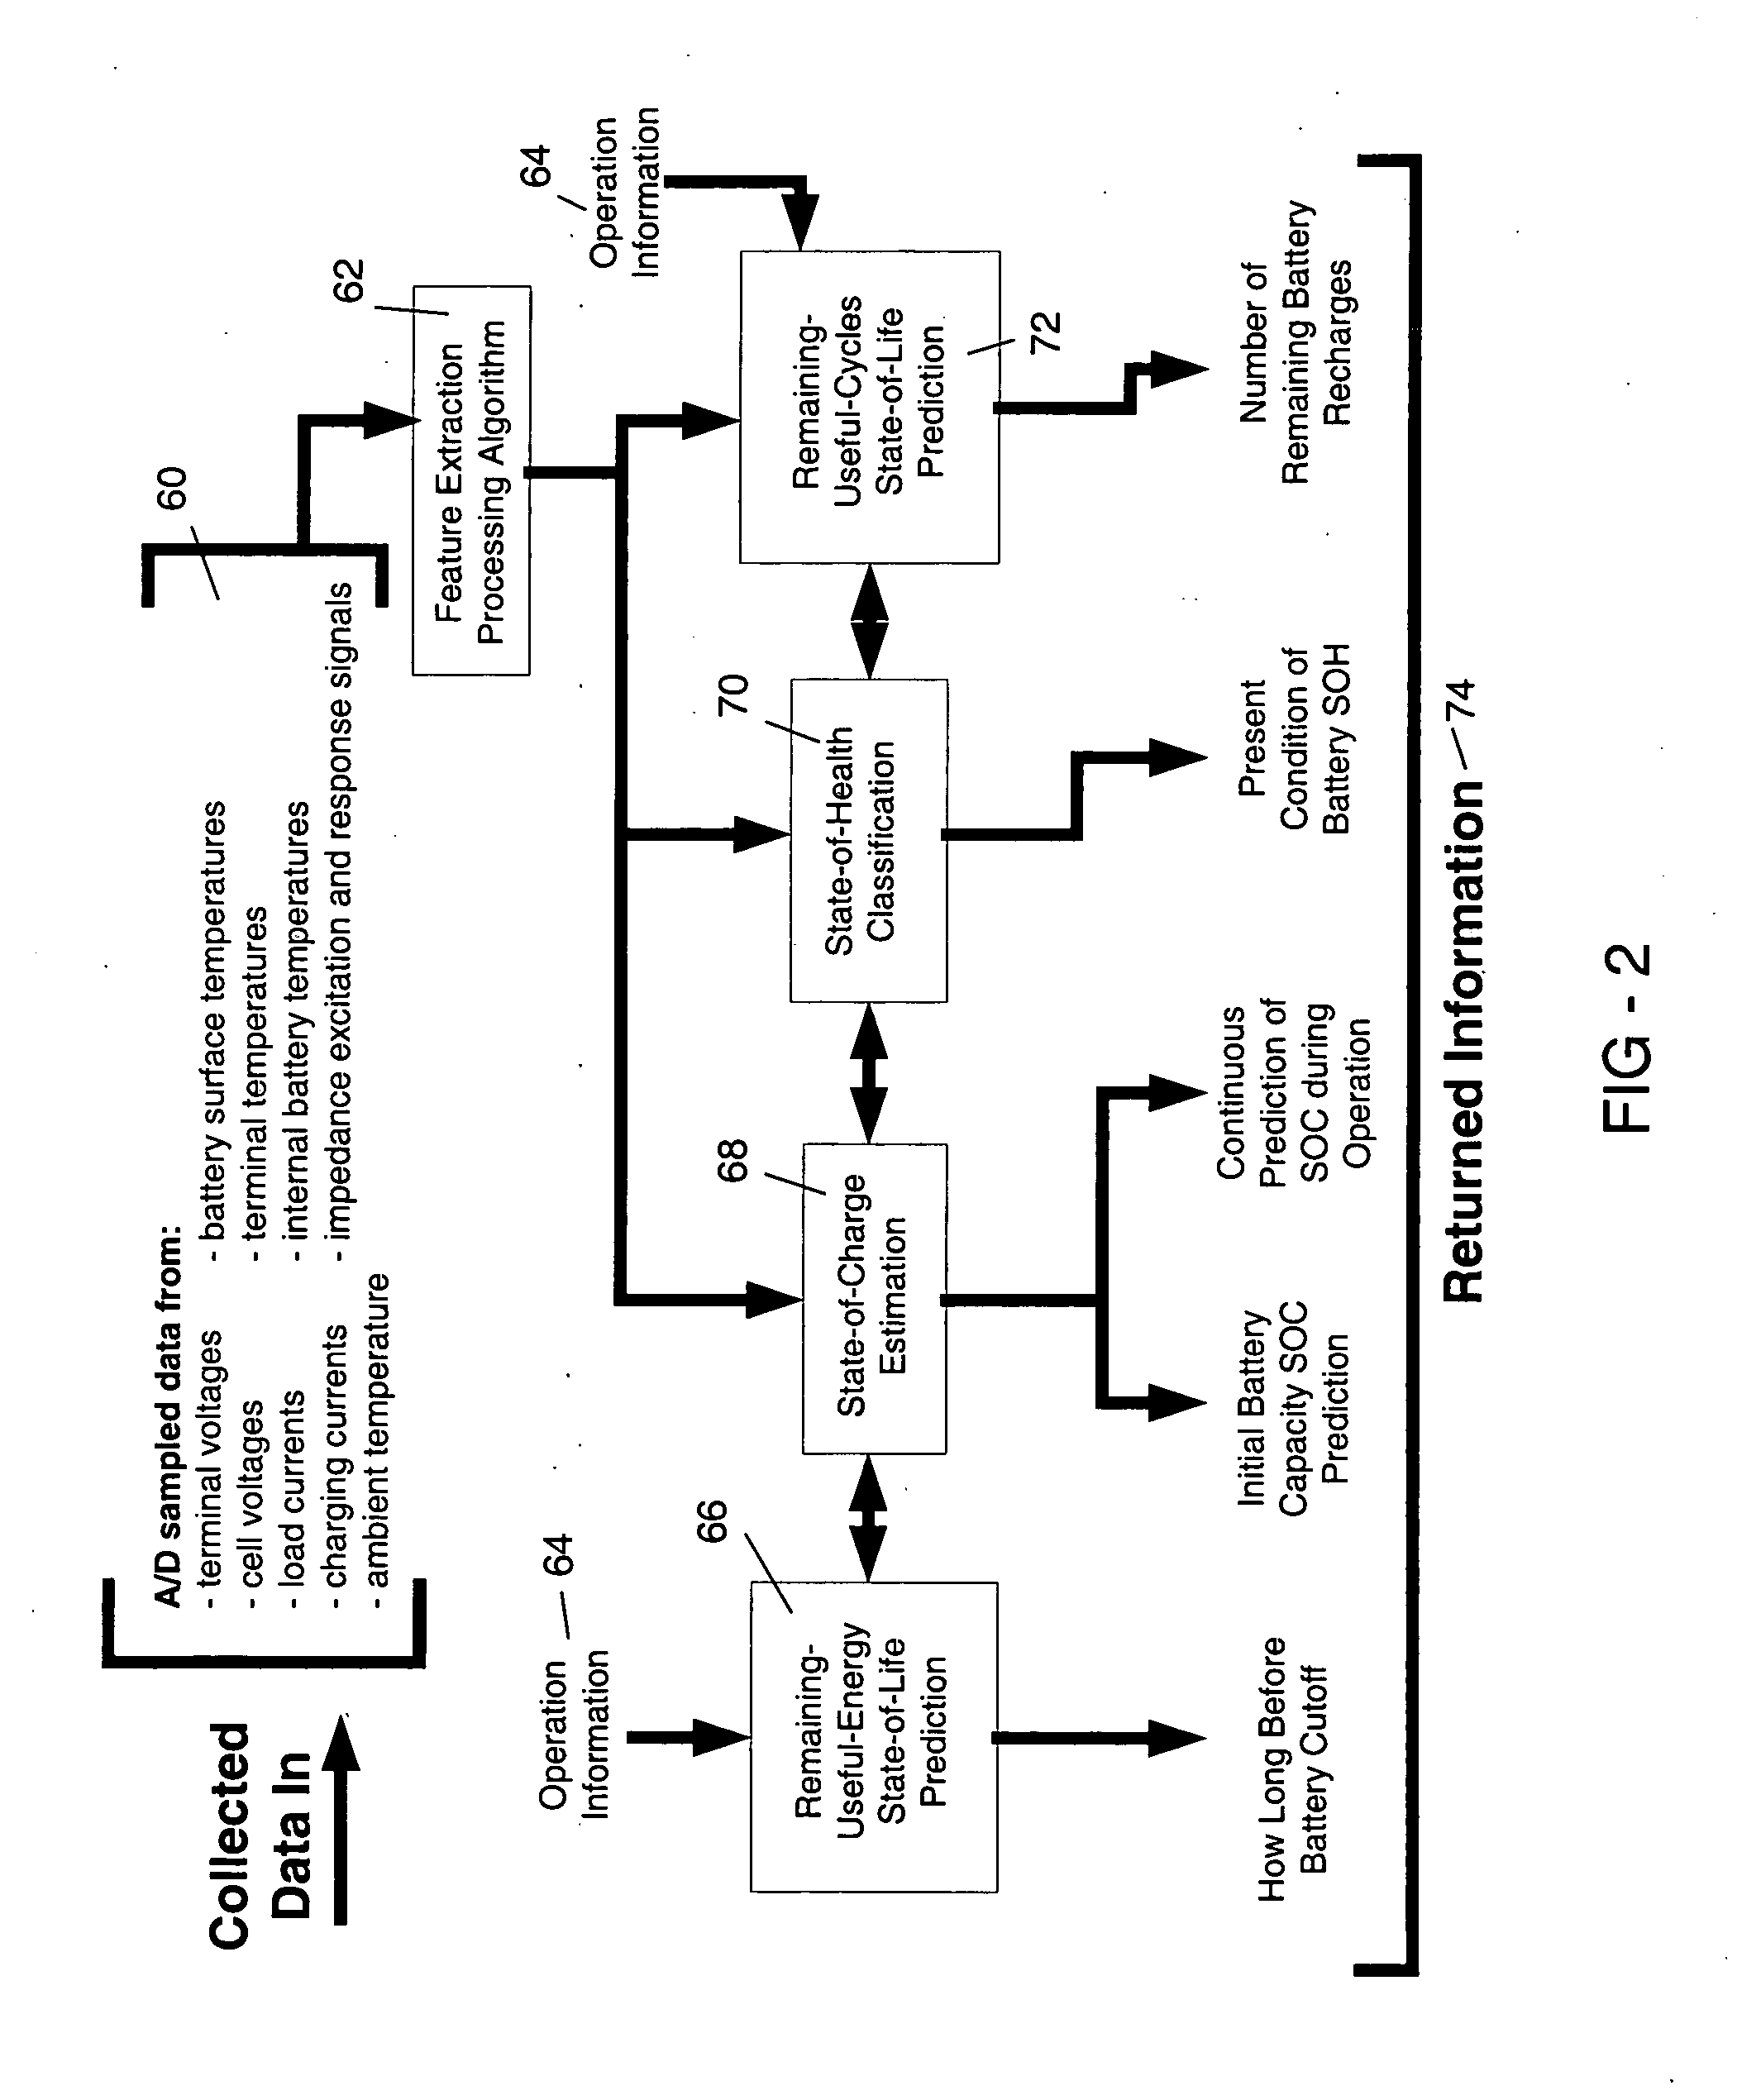 Model-based predictive diagnostic tool for primary and secondary batteries